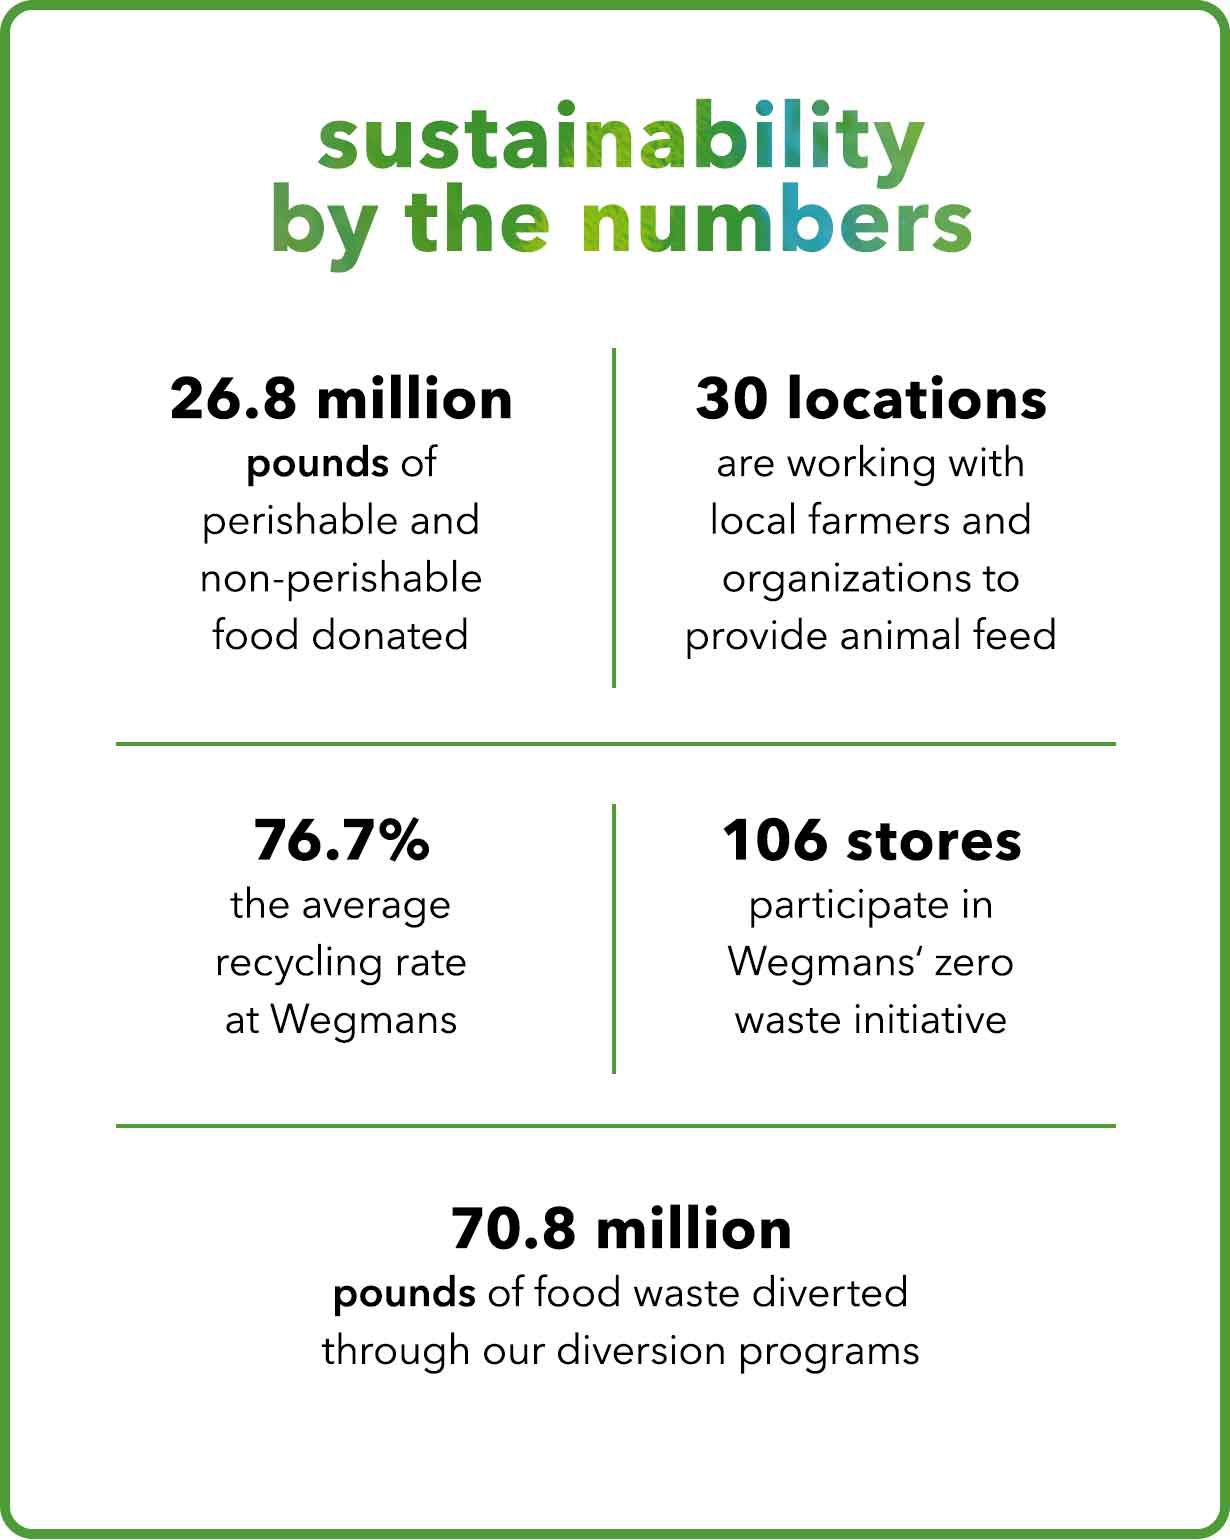 Chart with numerical data on Wegmans' food waste reduction efforts